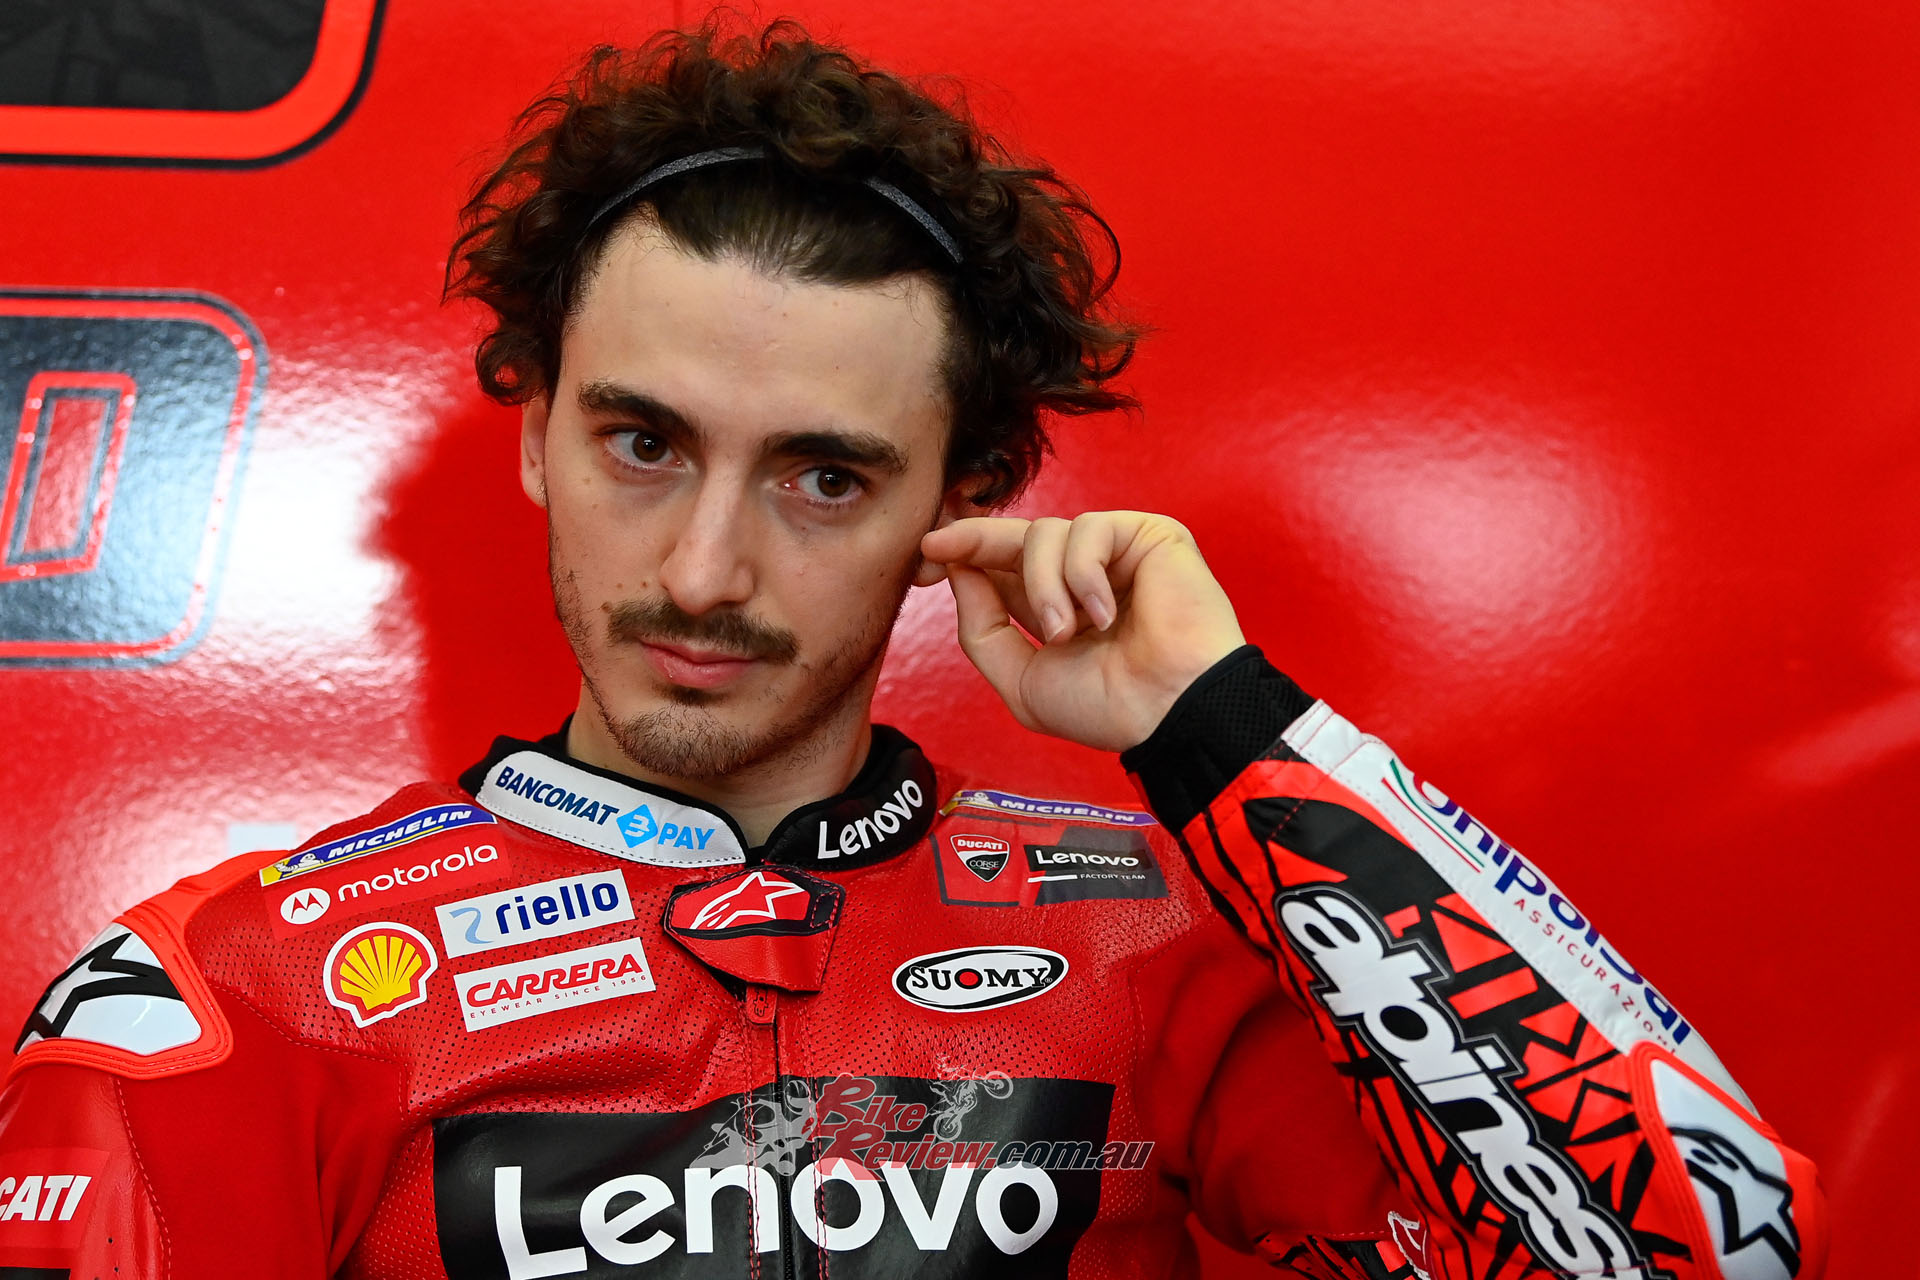 Francesco Bagnaia will be looking to take home more than the constructors championship for Ducati in 2022.